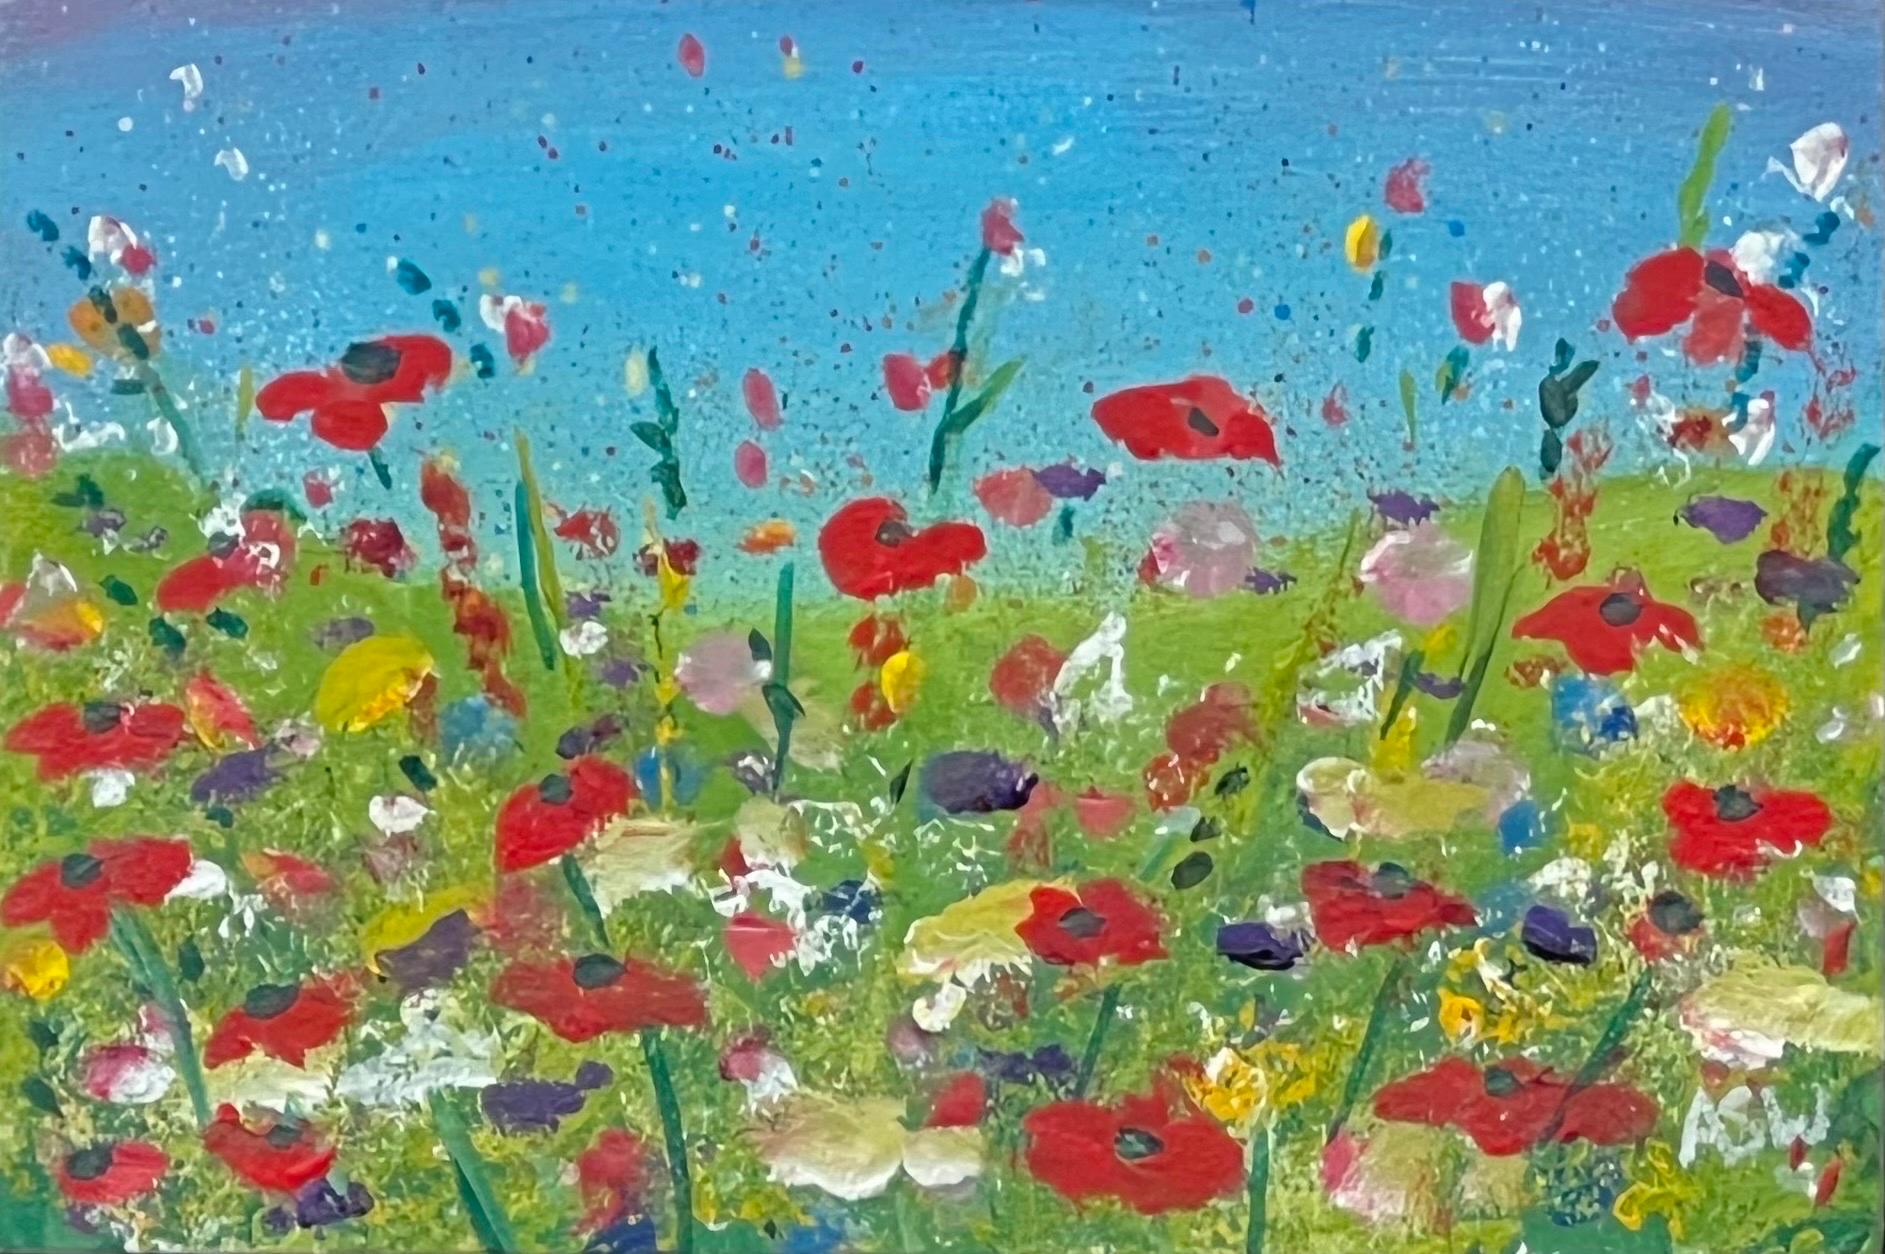 Miniature Red Poppy Flowers in a Wild Green Meadow with a Blue Sky in the English Countryside by Contemporary British Artist, Angela Wakefield. Framed in a contemporary black moulding with a white insert. 

Art measures 6 x 4 inches
Frame measures